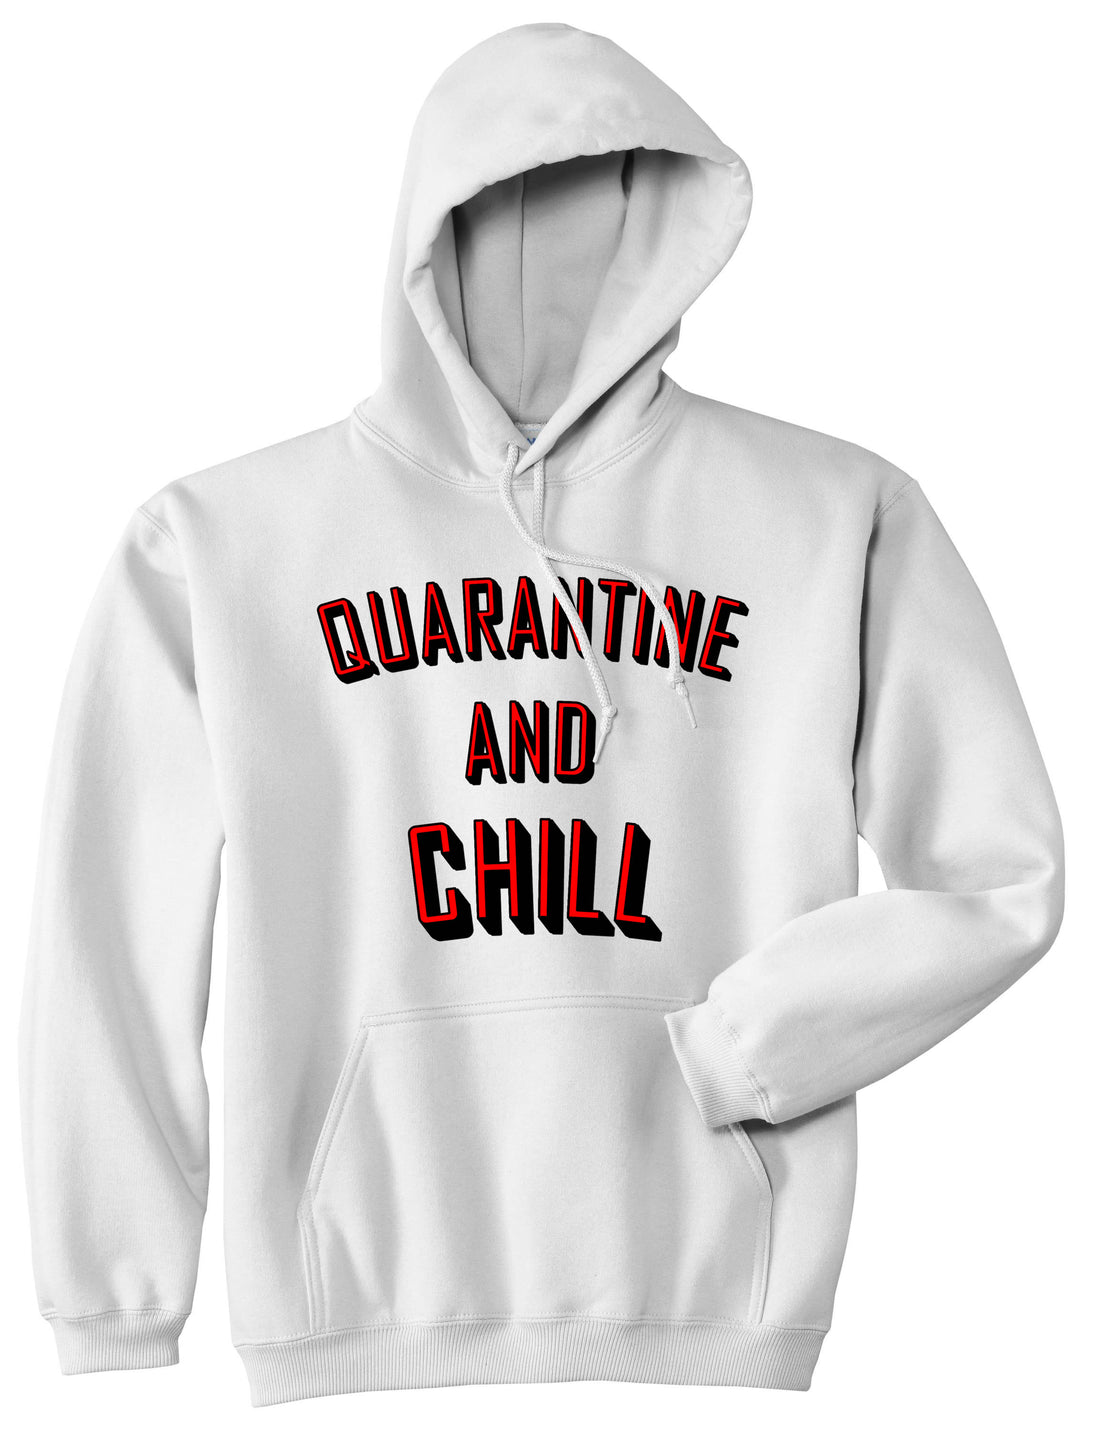 Quarantine And Chill Funny Meme Pullover Hoodie White